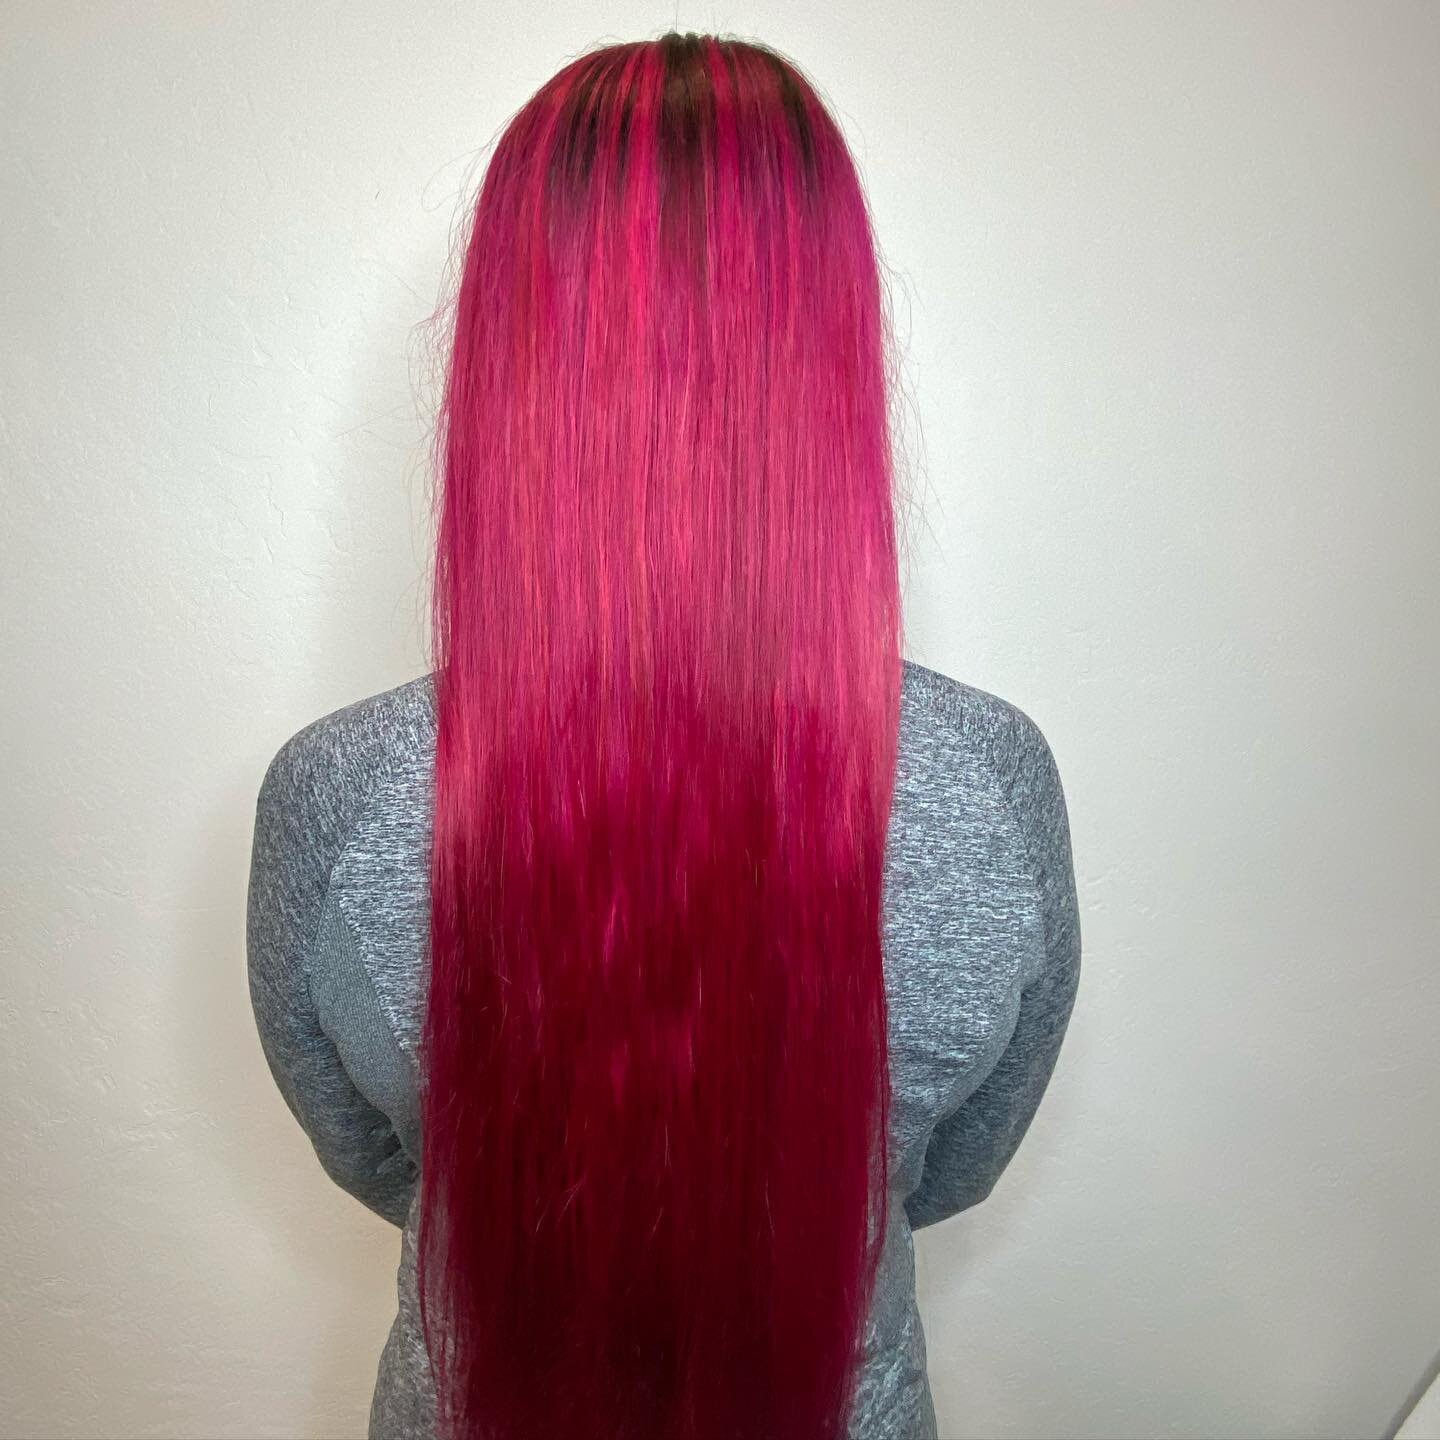 Happy (almost) Valentine&rsquo;s Day with this Cupid color by @dianne.williams21 
@pulpriothair Thanks Nicole for coming in!